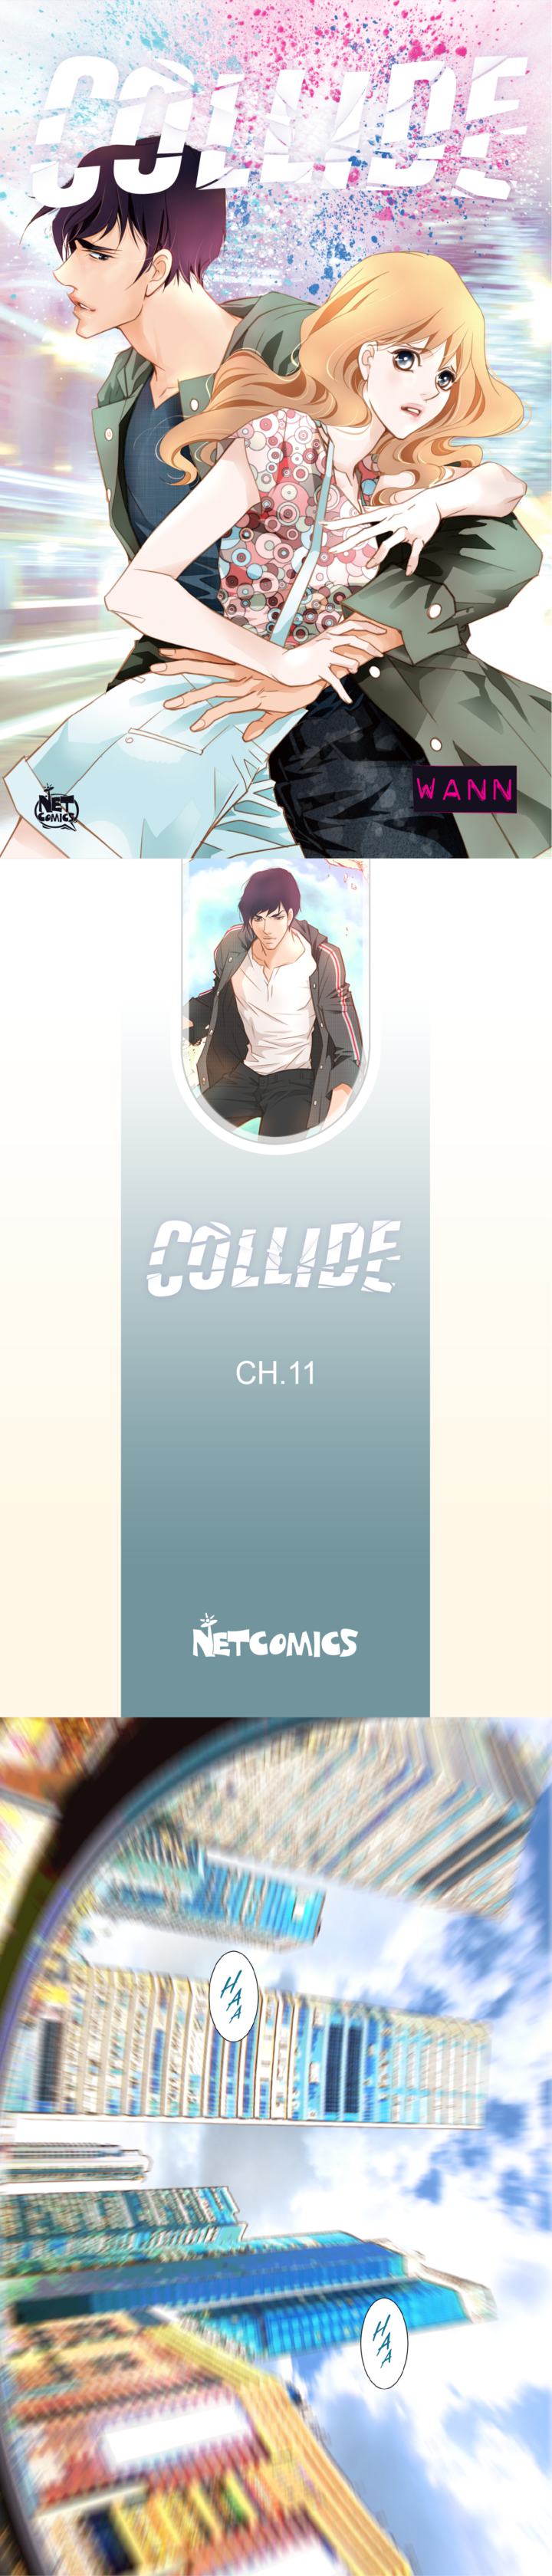 Collide - Page 1